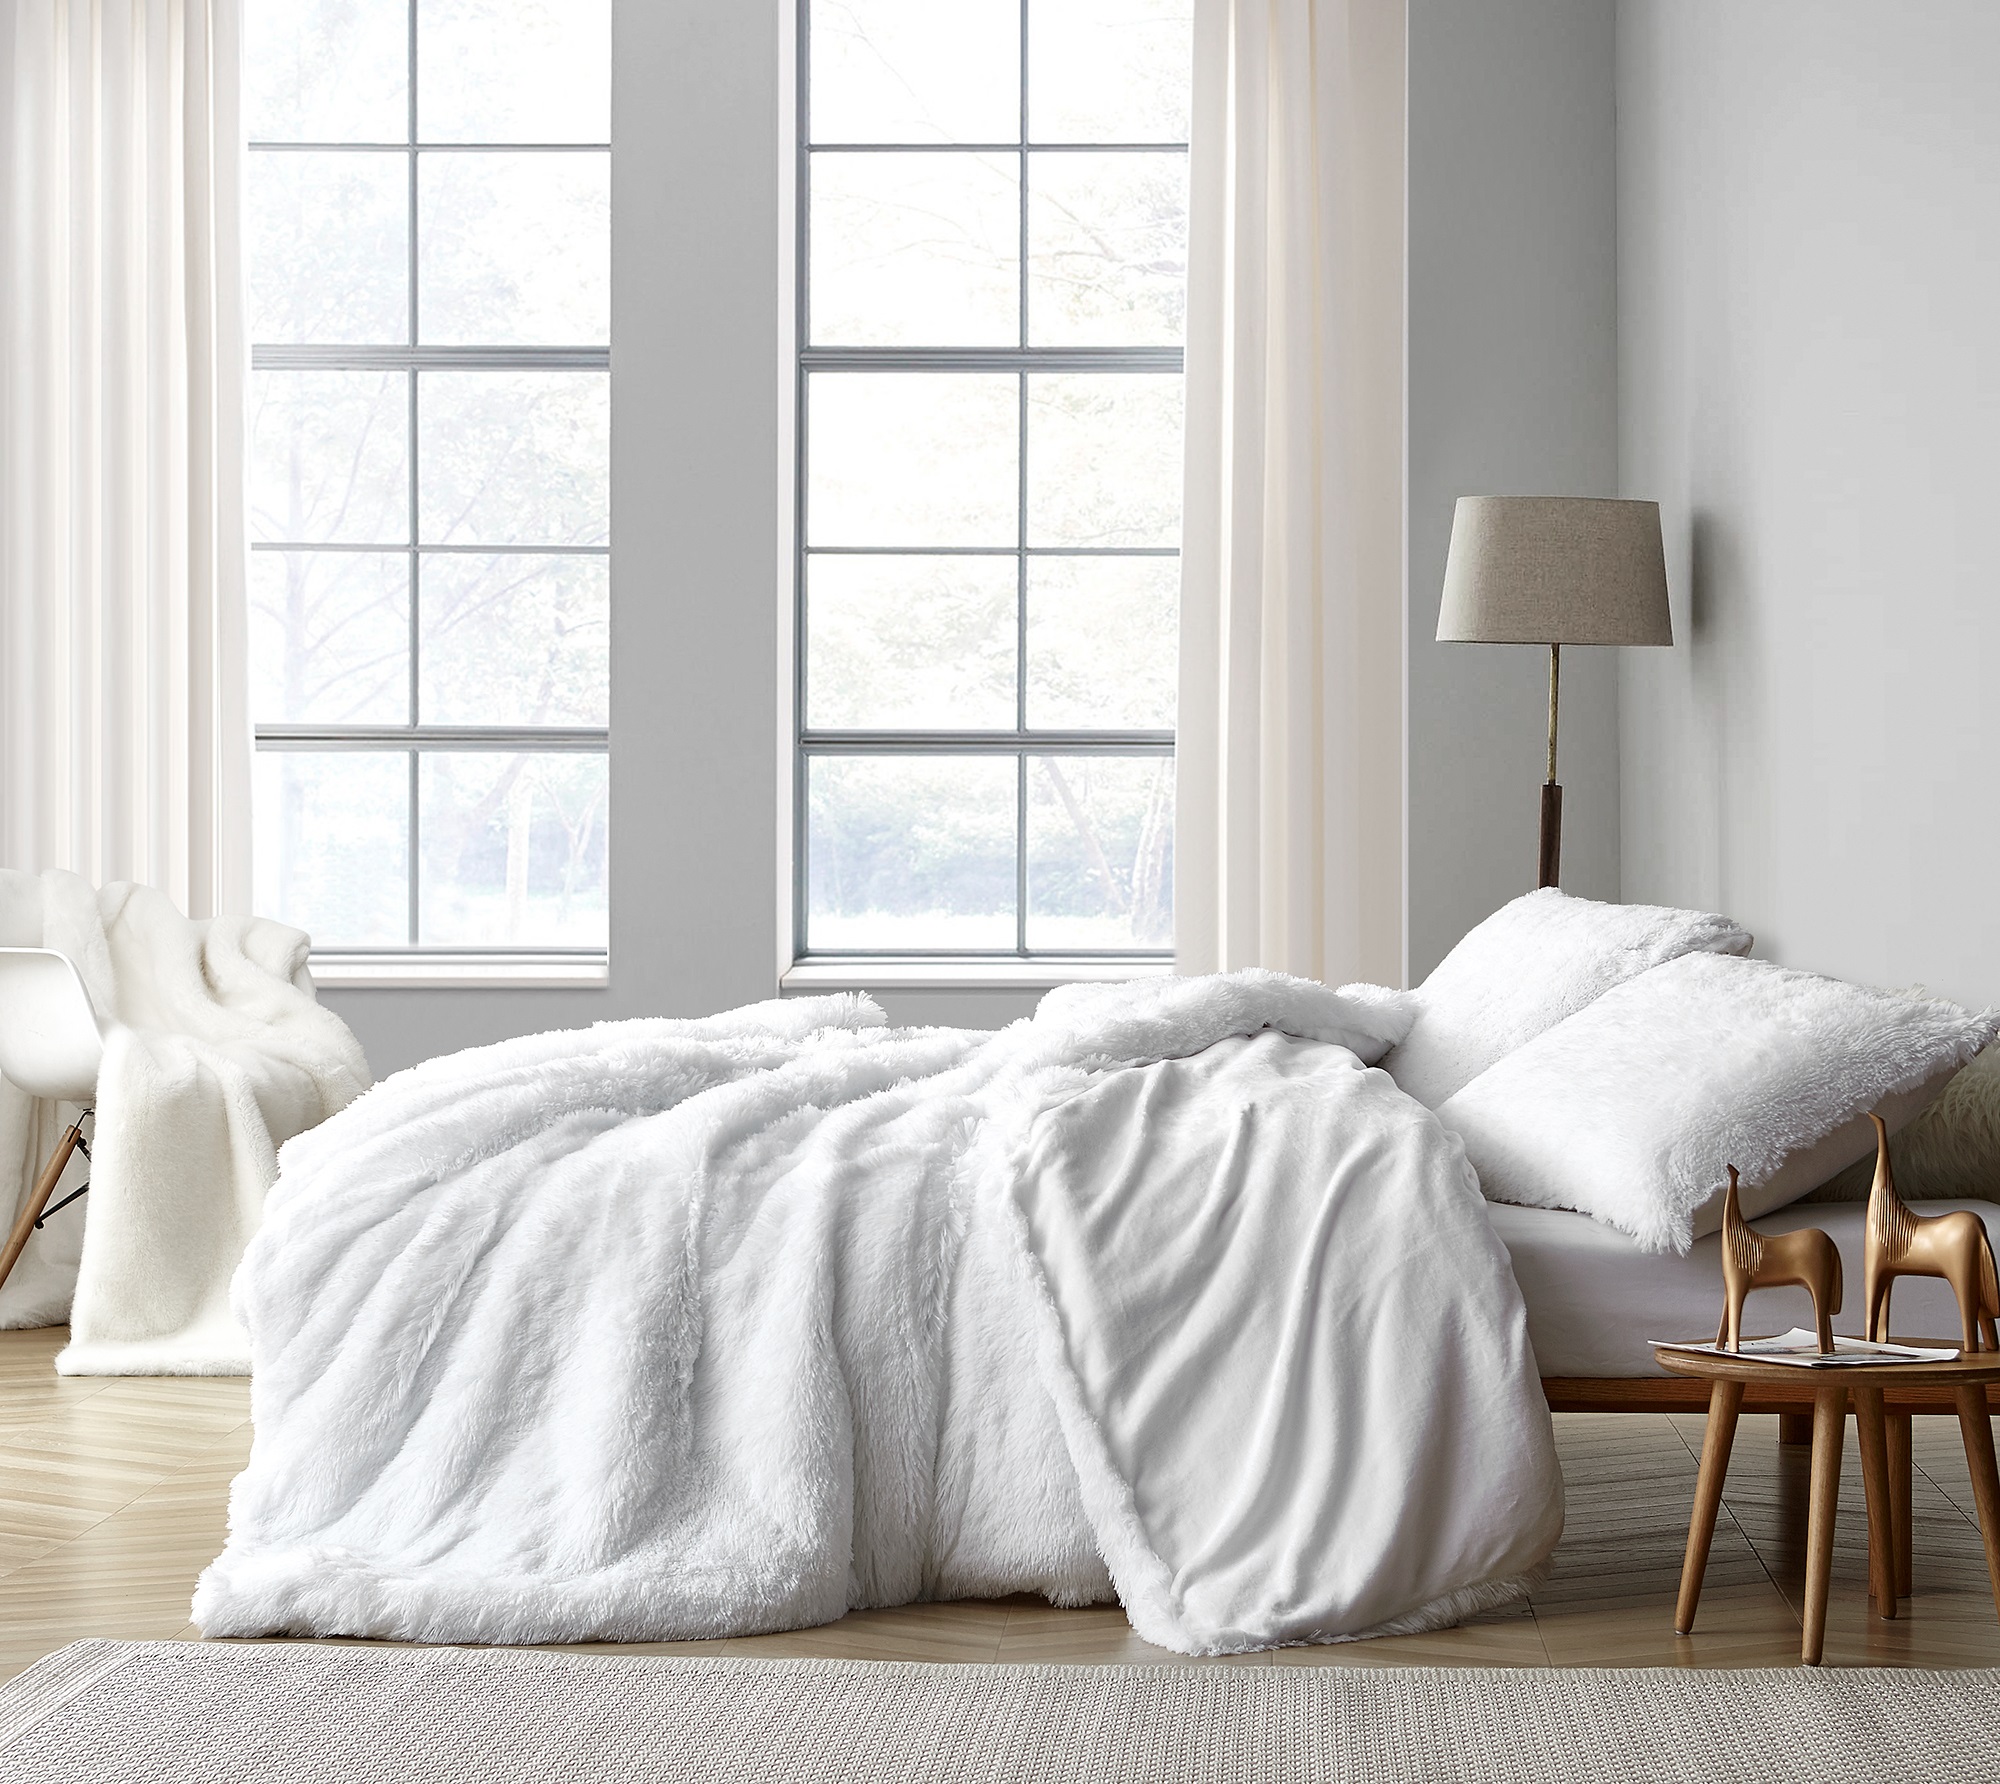 Coma Inducer® Duvet Cover - Are You Kidding? - White